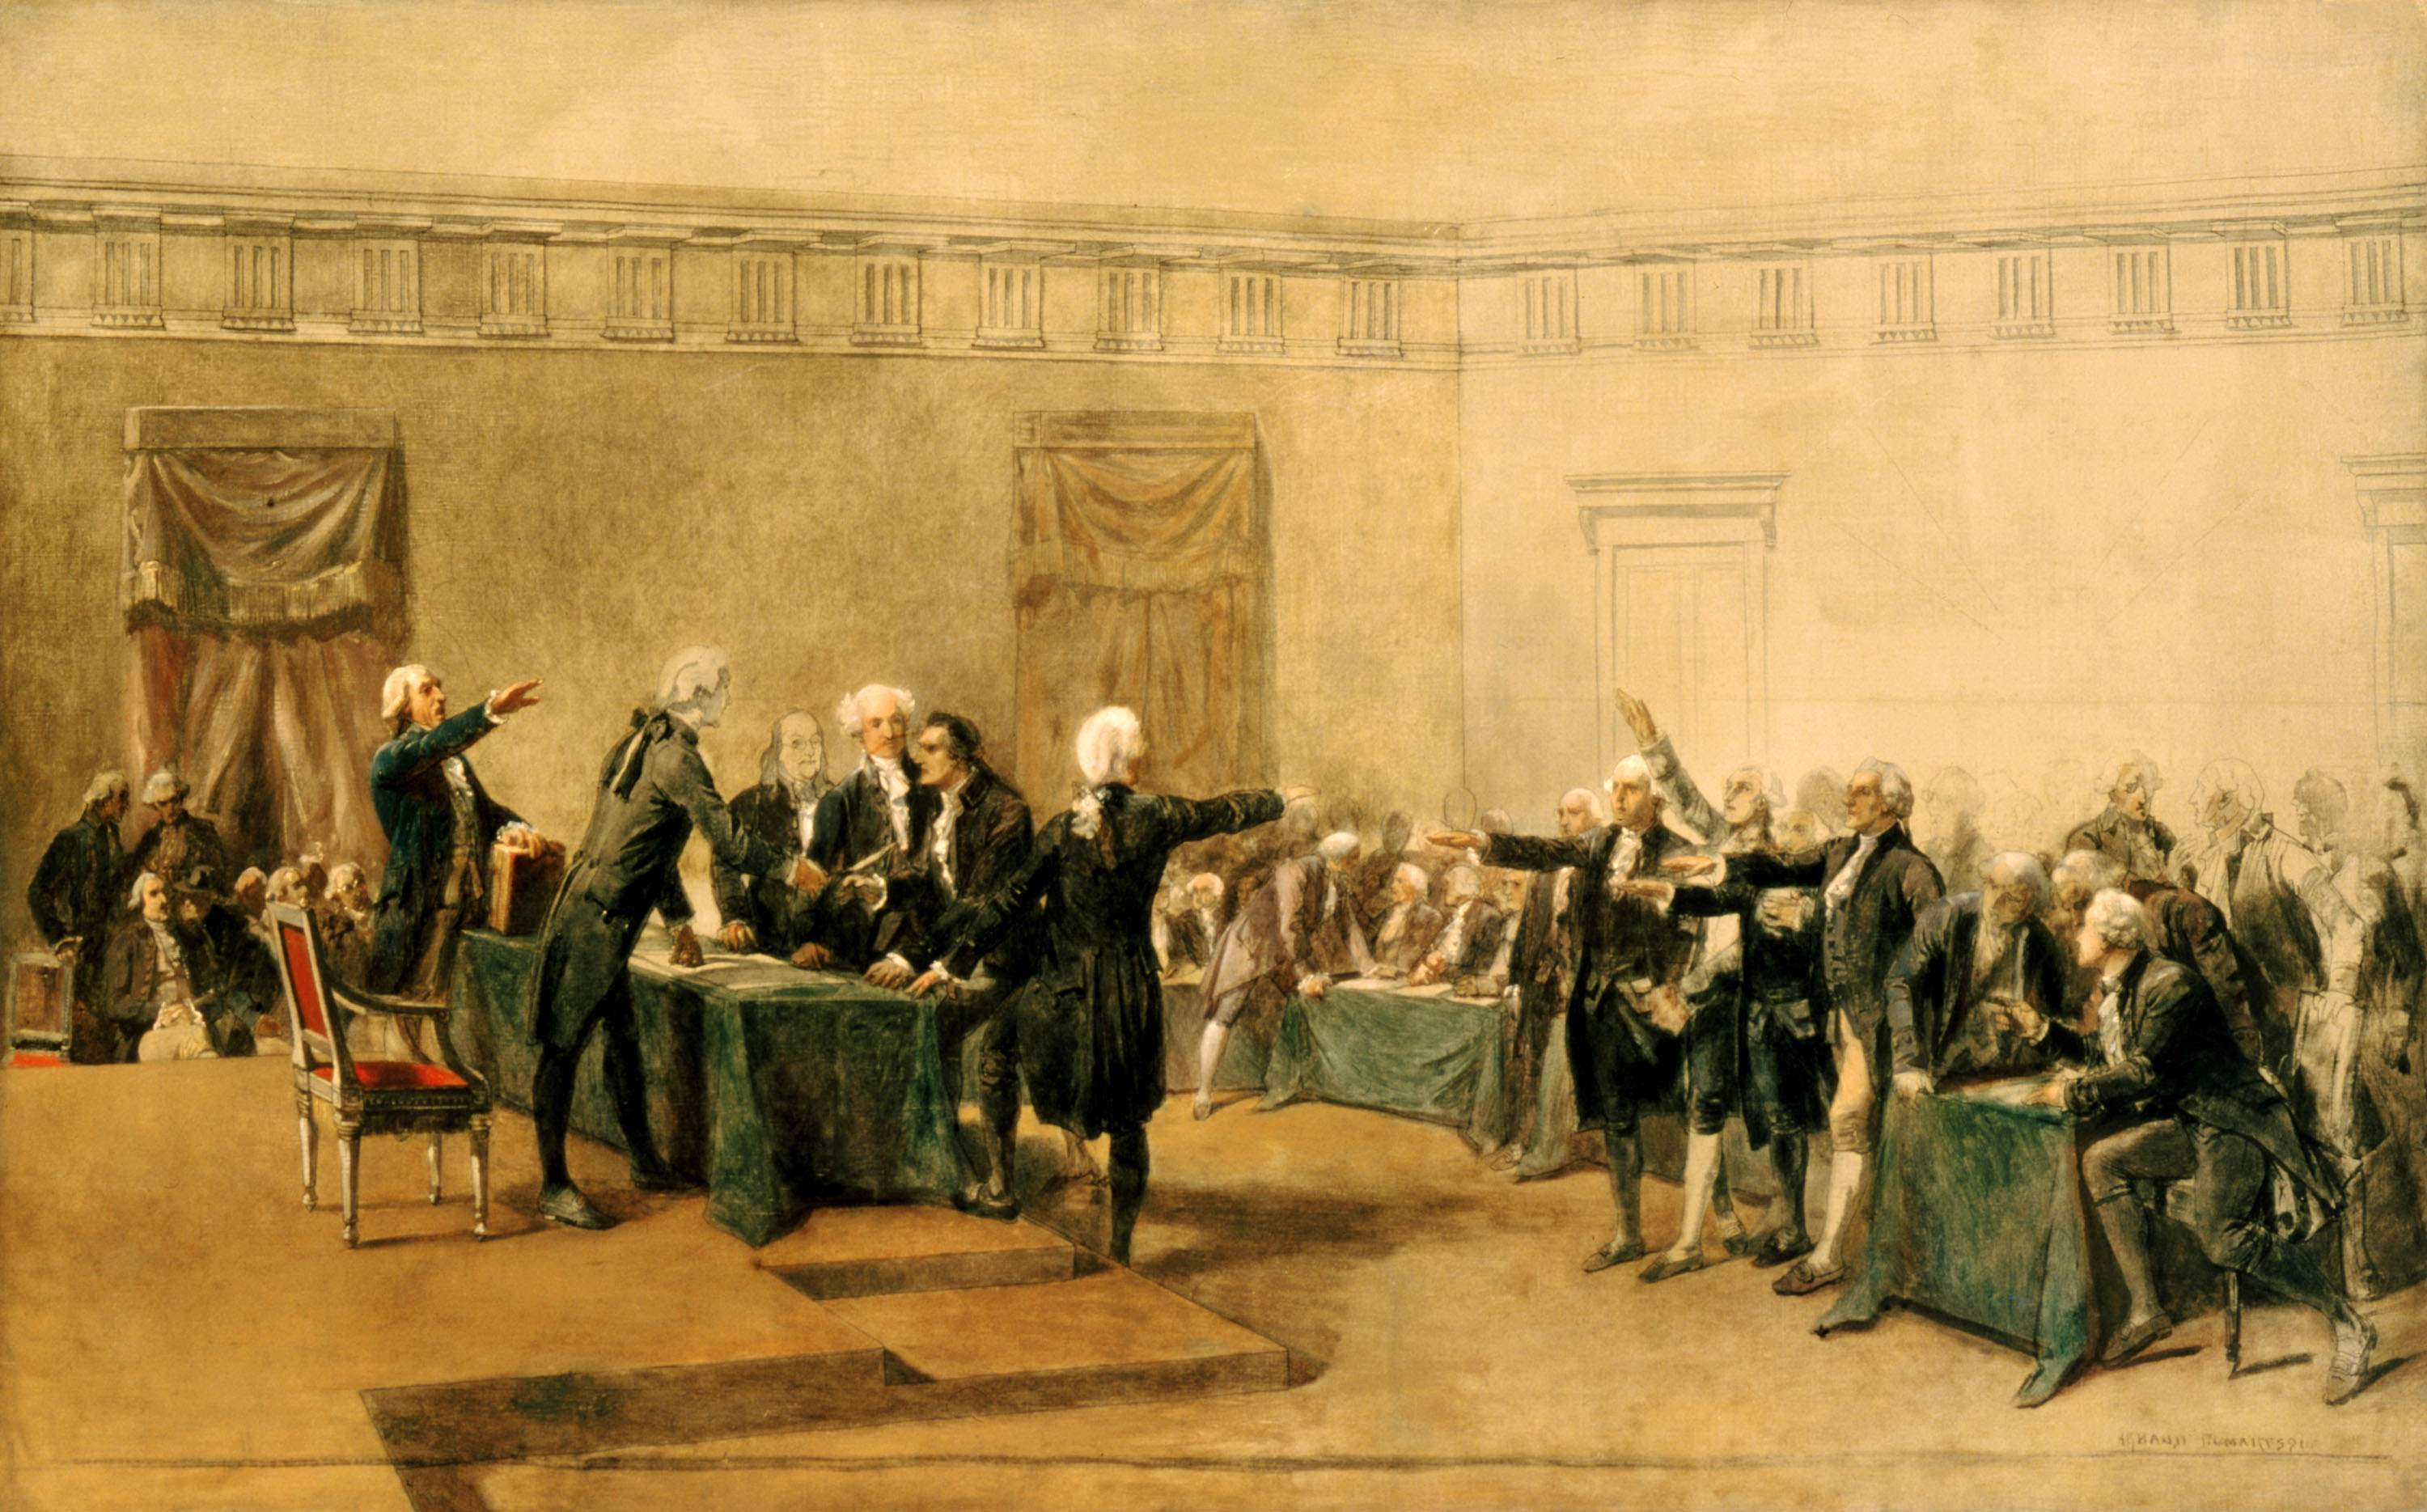 Signing_of_Declaration_of_Independence_by_Armand-Dumaresq,_c1873_-_restored